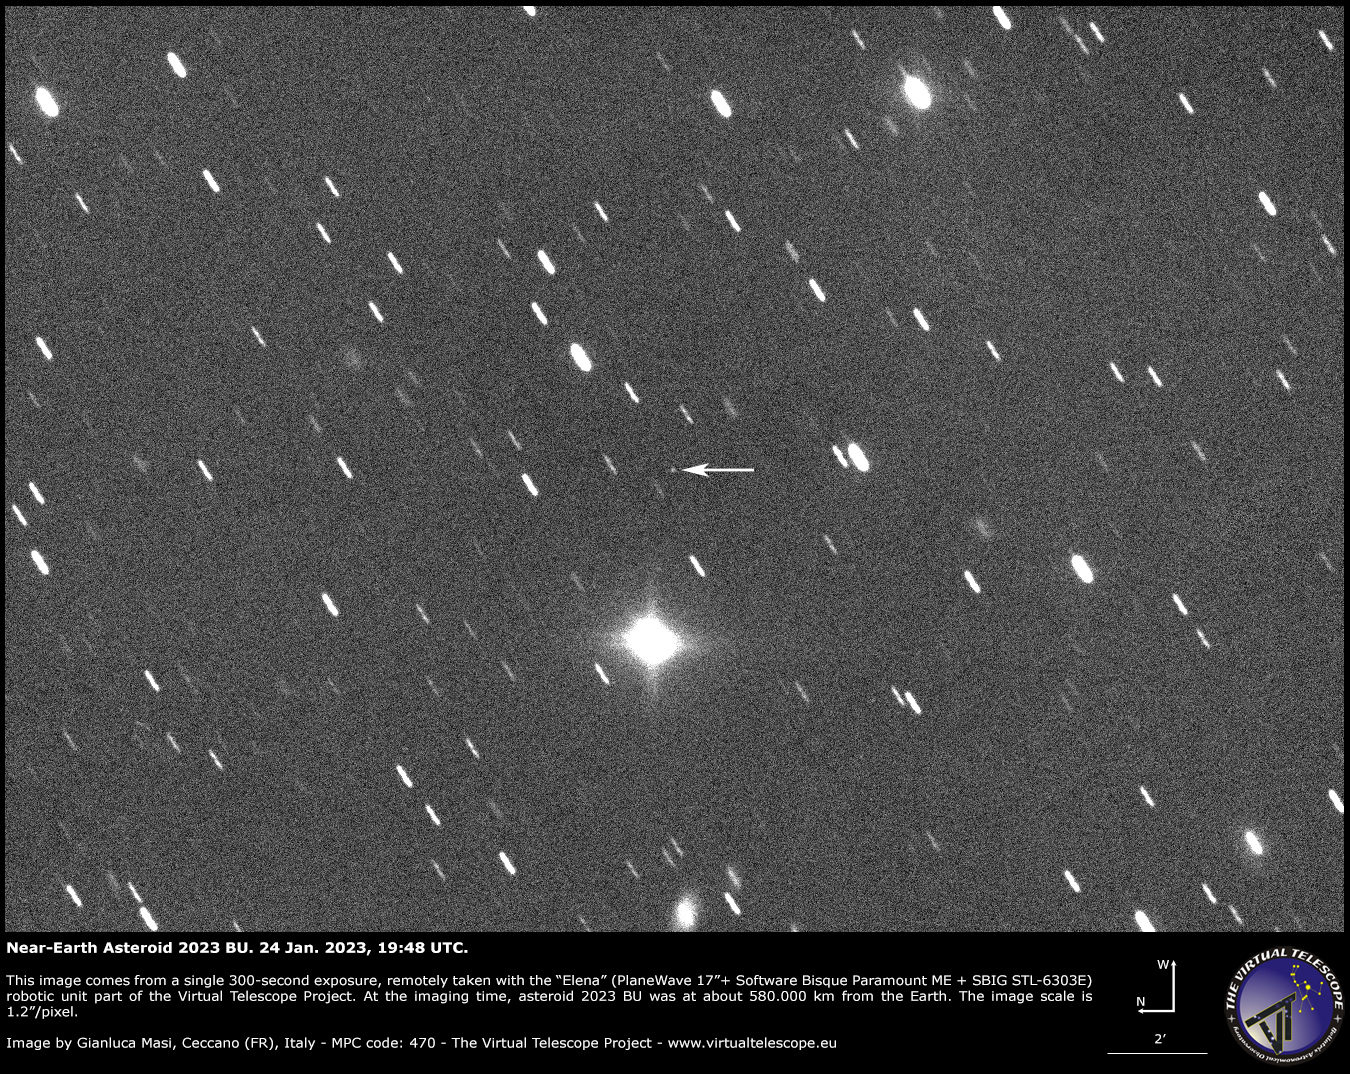 Slumber Alarmerende Vi ses i morgen Near-Earth Asteroid 2023 BU extremely close encounter: a image - 24 Jan.  2023 - The Virtual Telescope Project 2.0